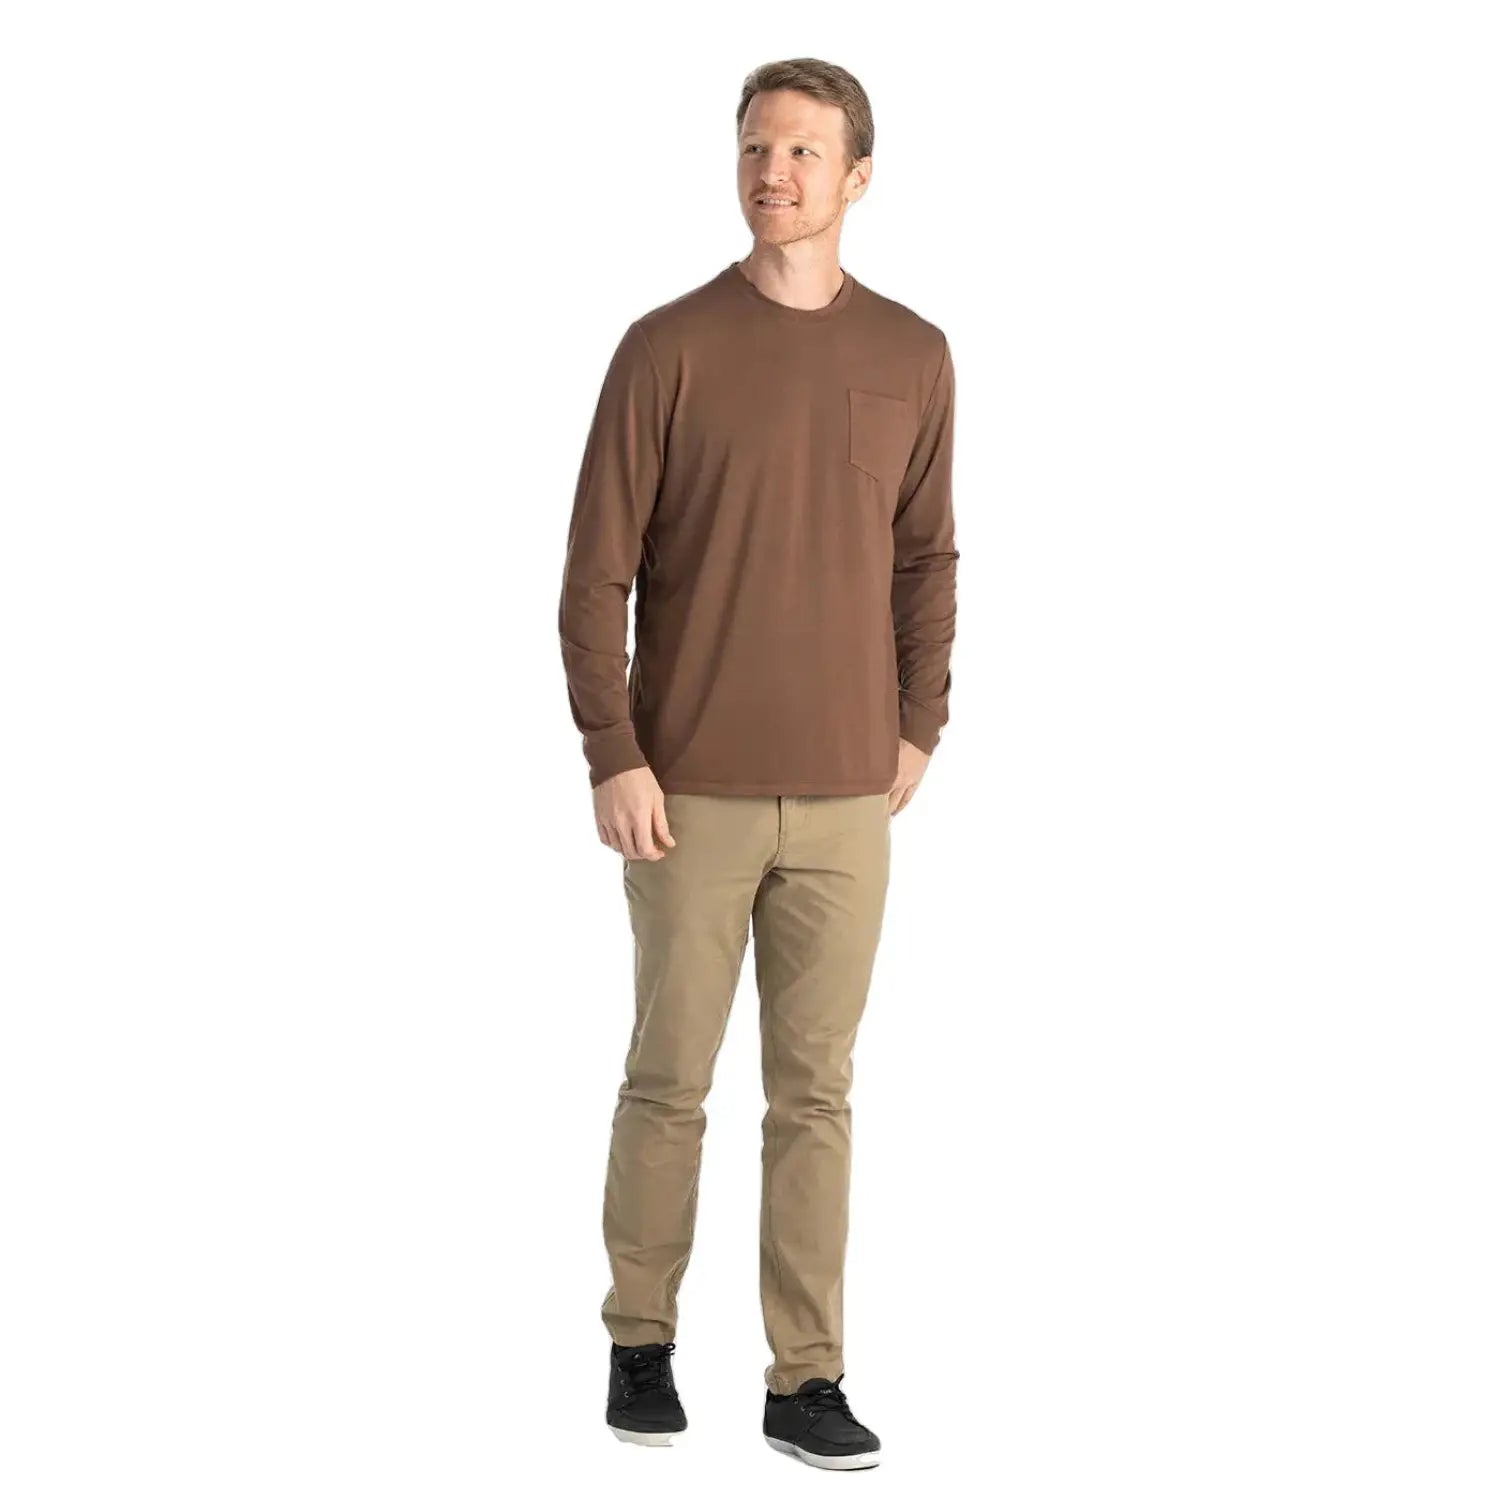 Free Fly M's Bamboo Flex Long Sleeve Pocket Tee, Mustang, front view on model